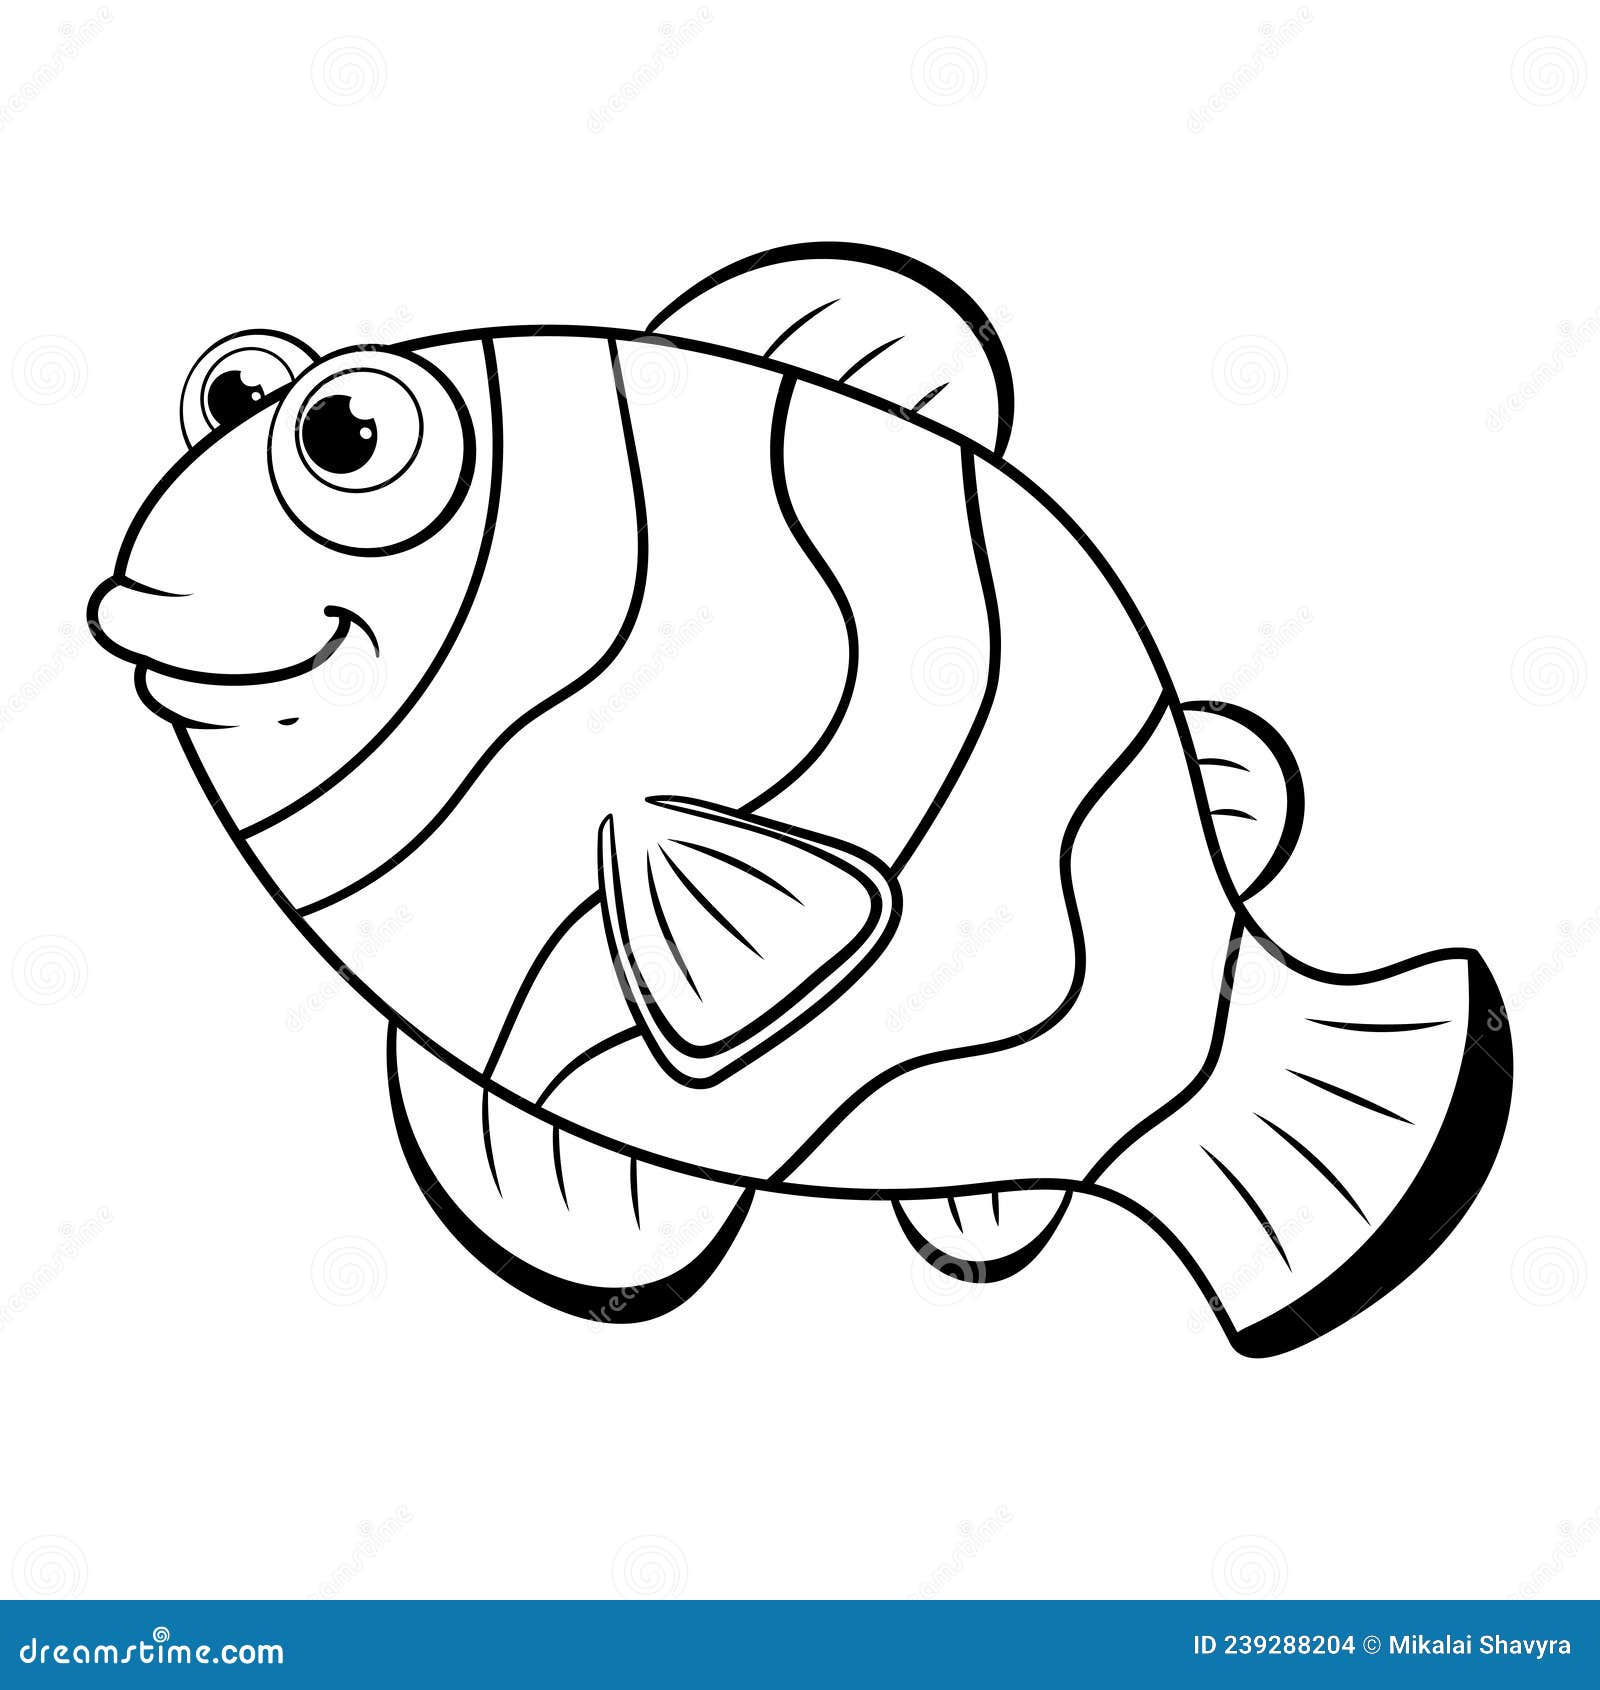 Colorless cartoon clown fish coloring pages template page for coloring book of funny sea fish for kids zebra fish stock vector